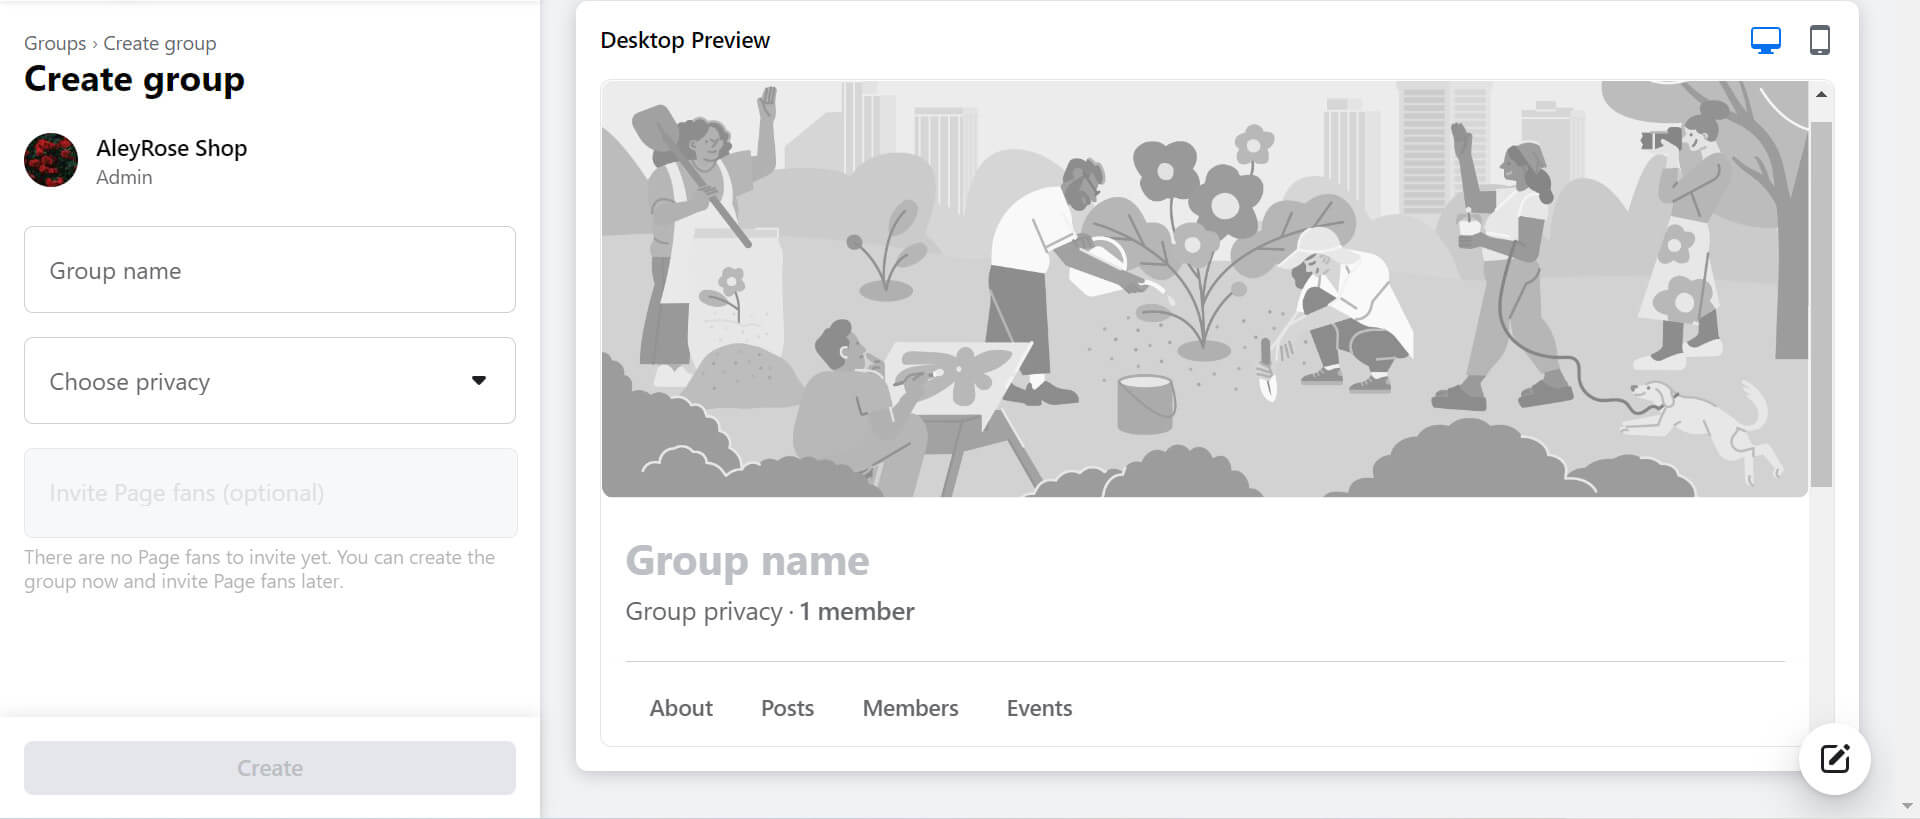 Choose the privacy level and name your group